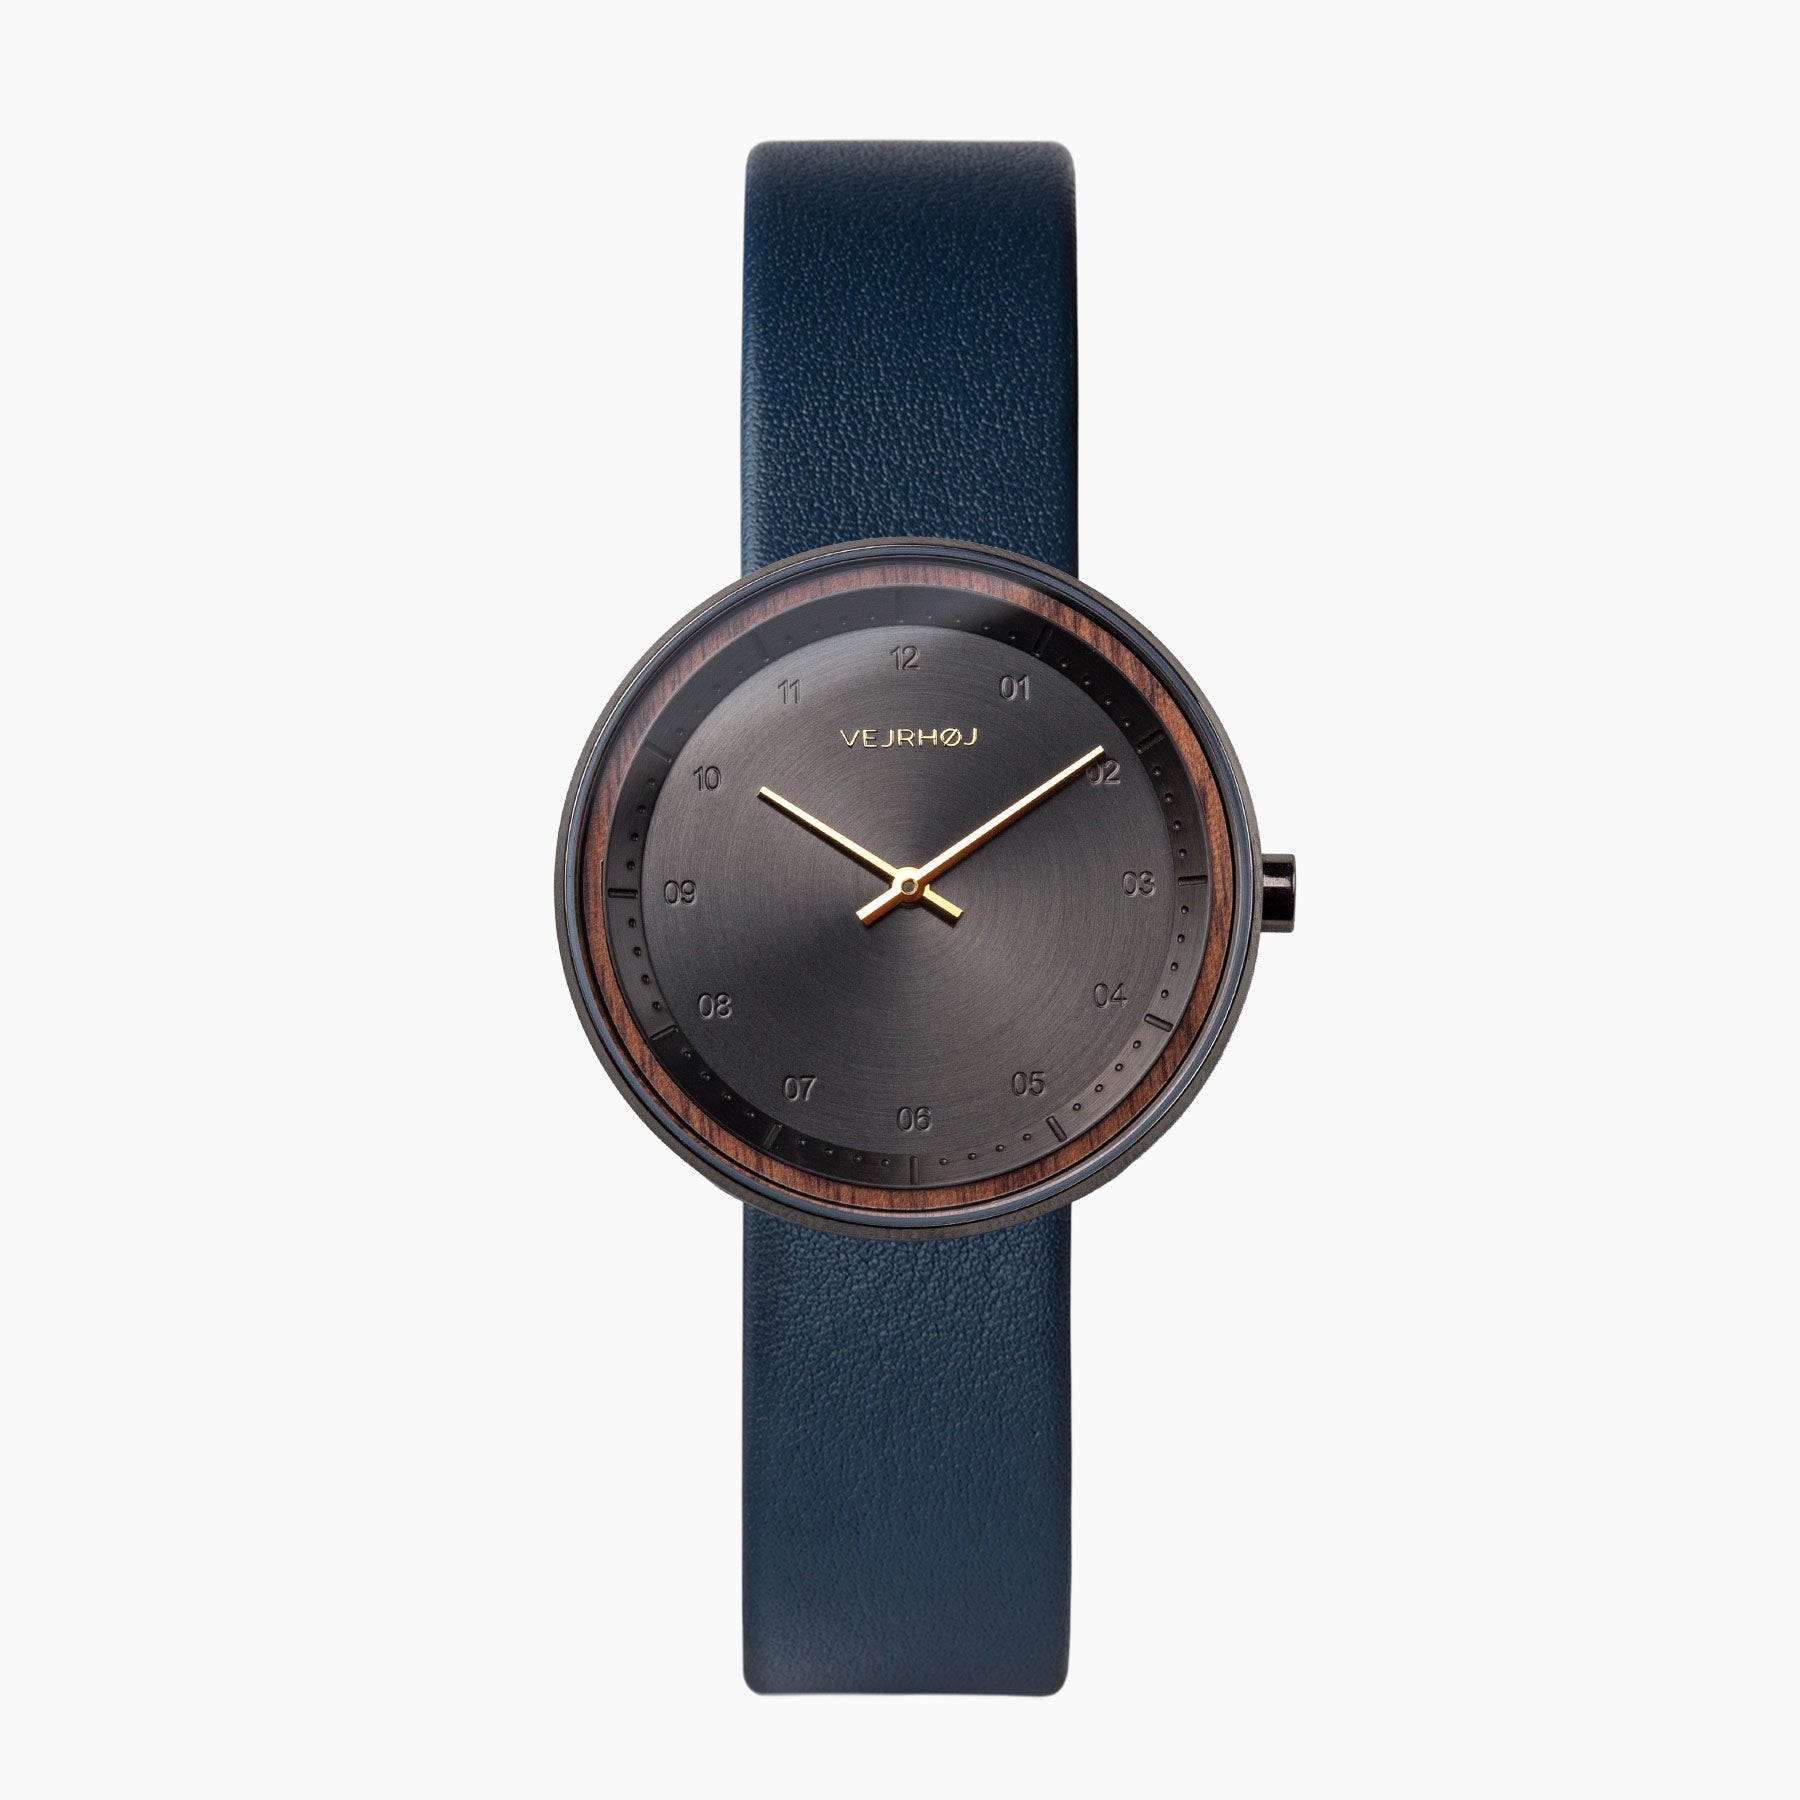 Petite black watch with wooden ring surrounding dial with blue straps